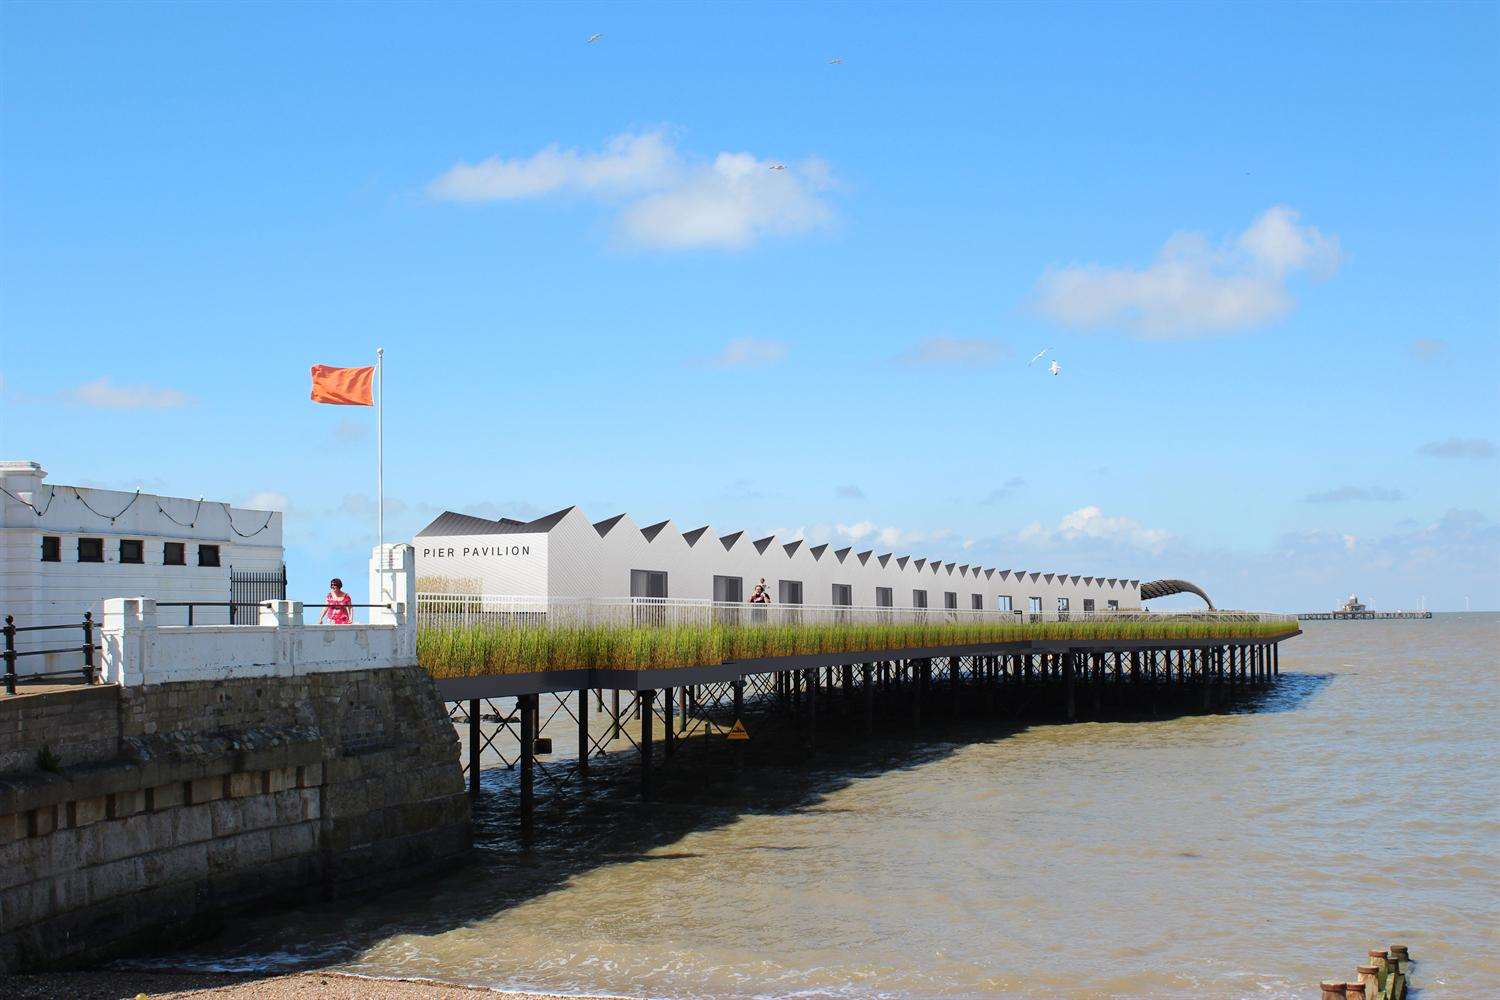 How the pier might look. Image: Tim Sanderson